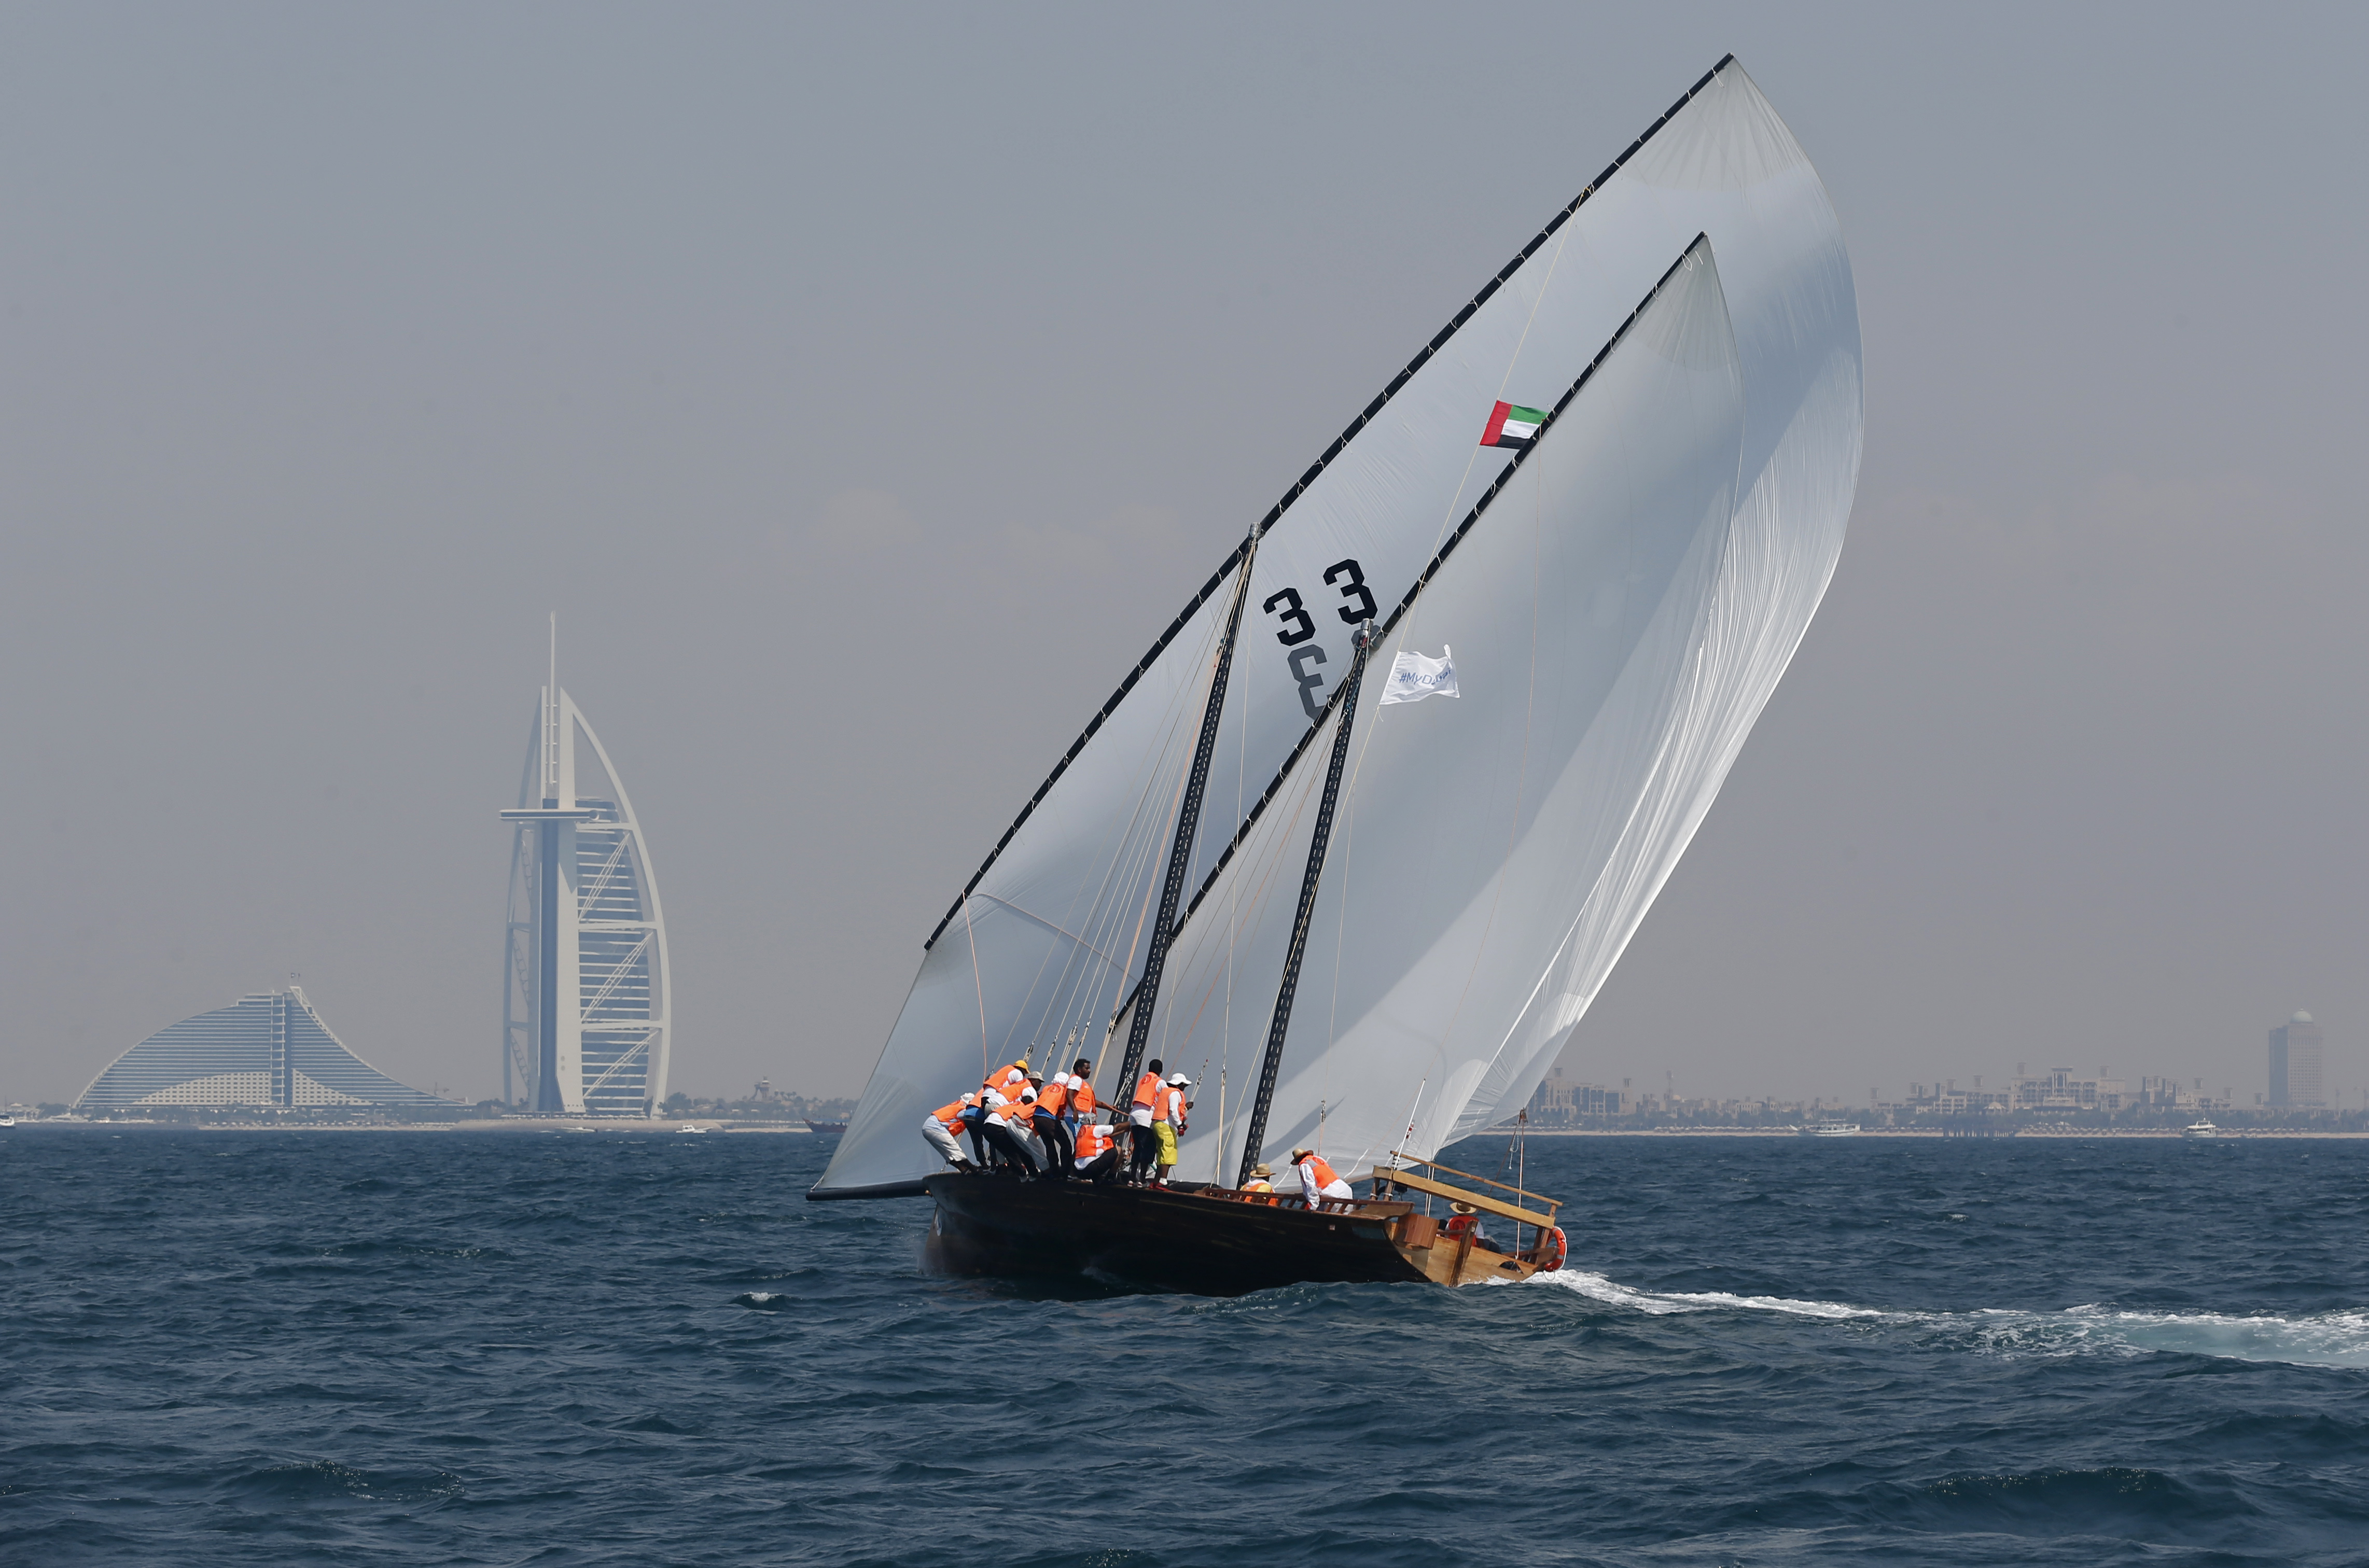 91 Boats Competing for the first round of 60ft Dhow Race